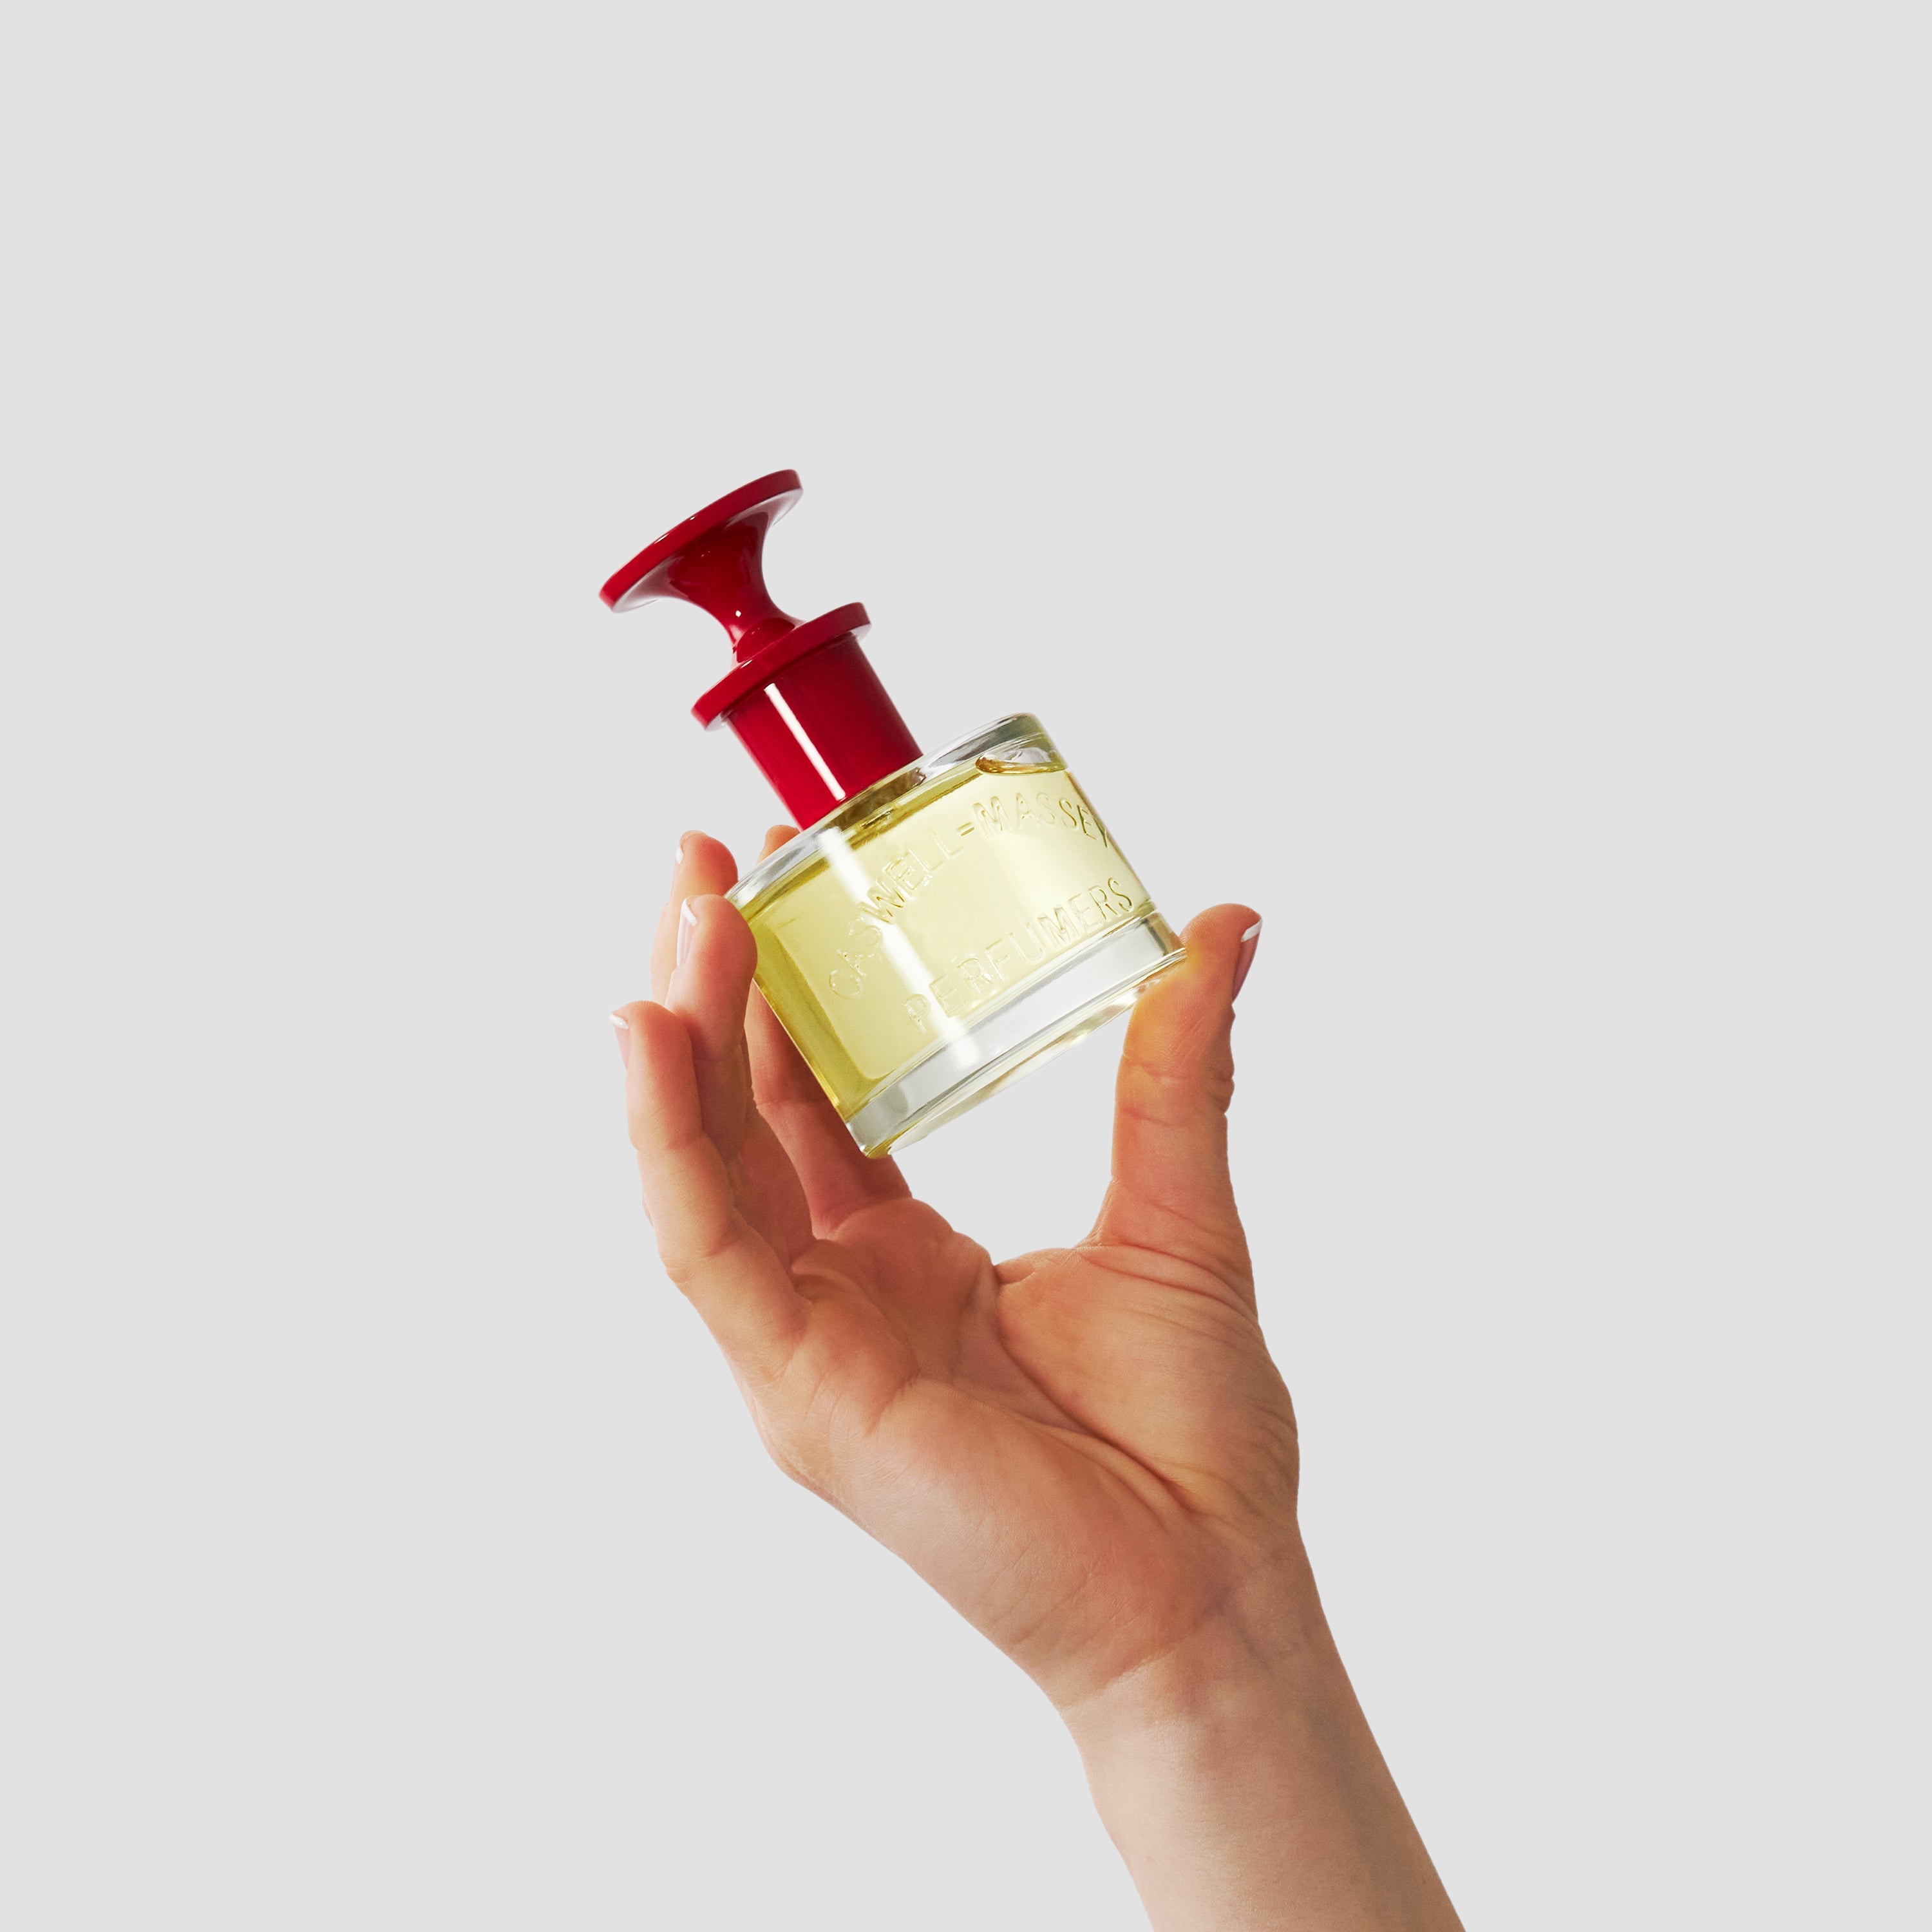 Caswell-Massey Fragrance for Women Collection: woman's hand holding up Marem Perfume (60 mL) with red cap